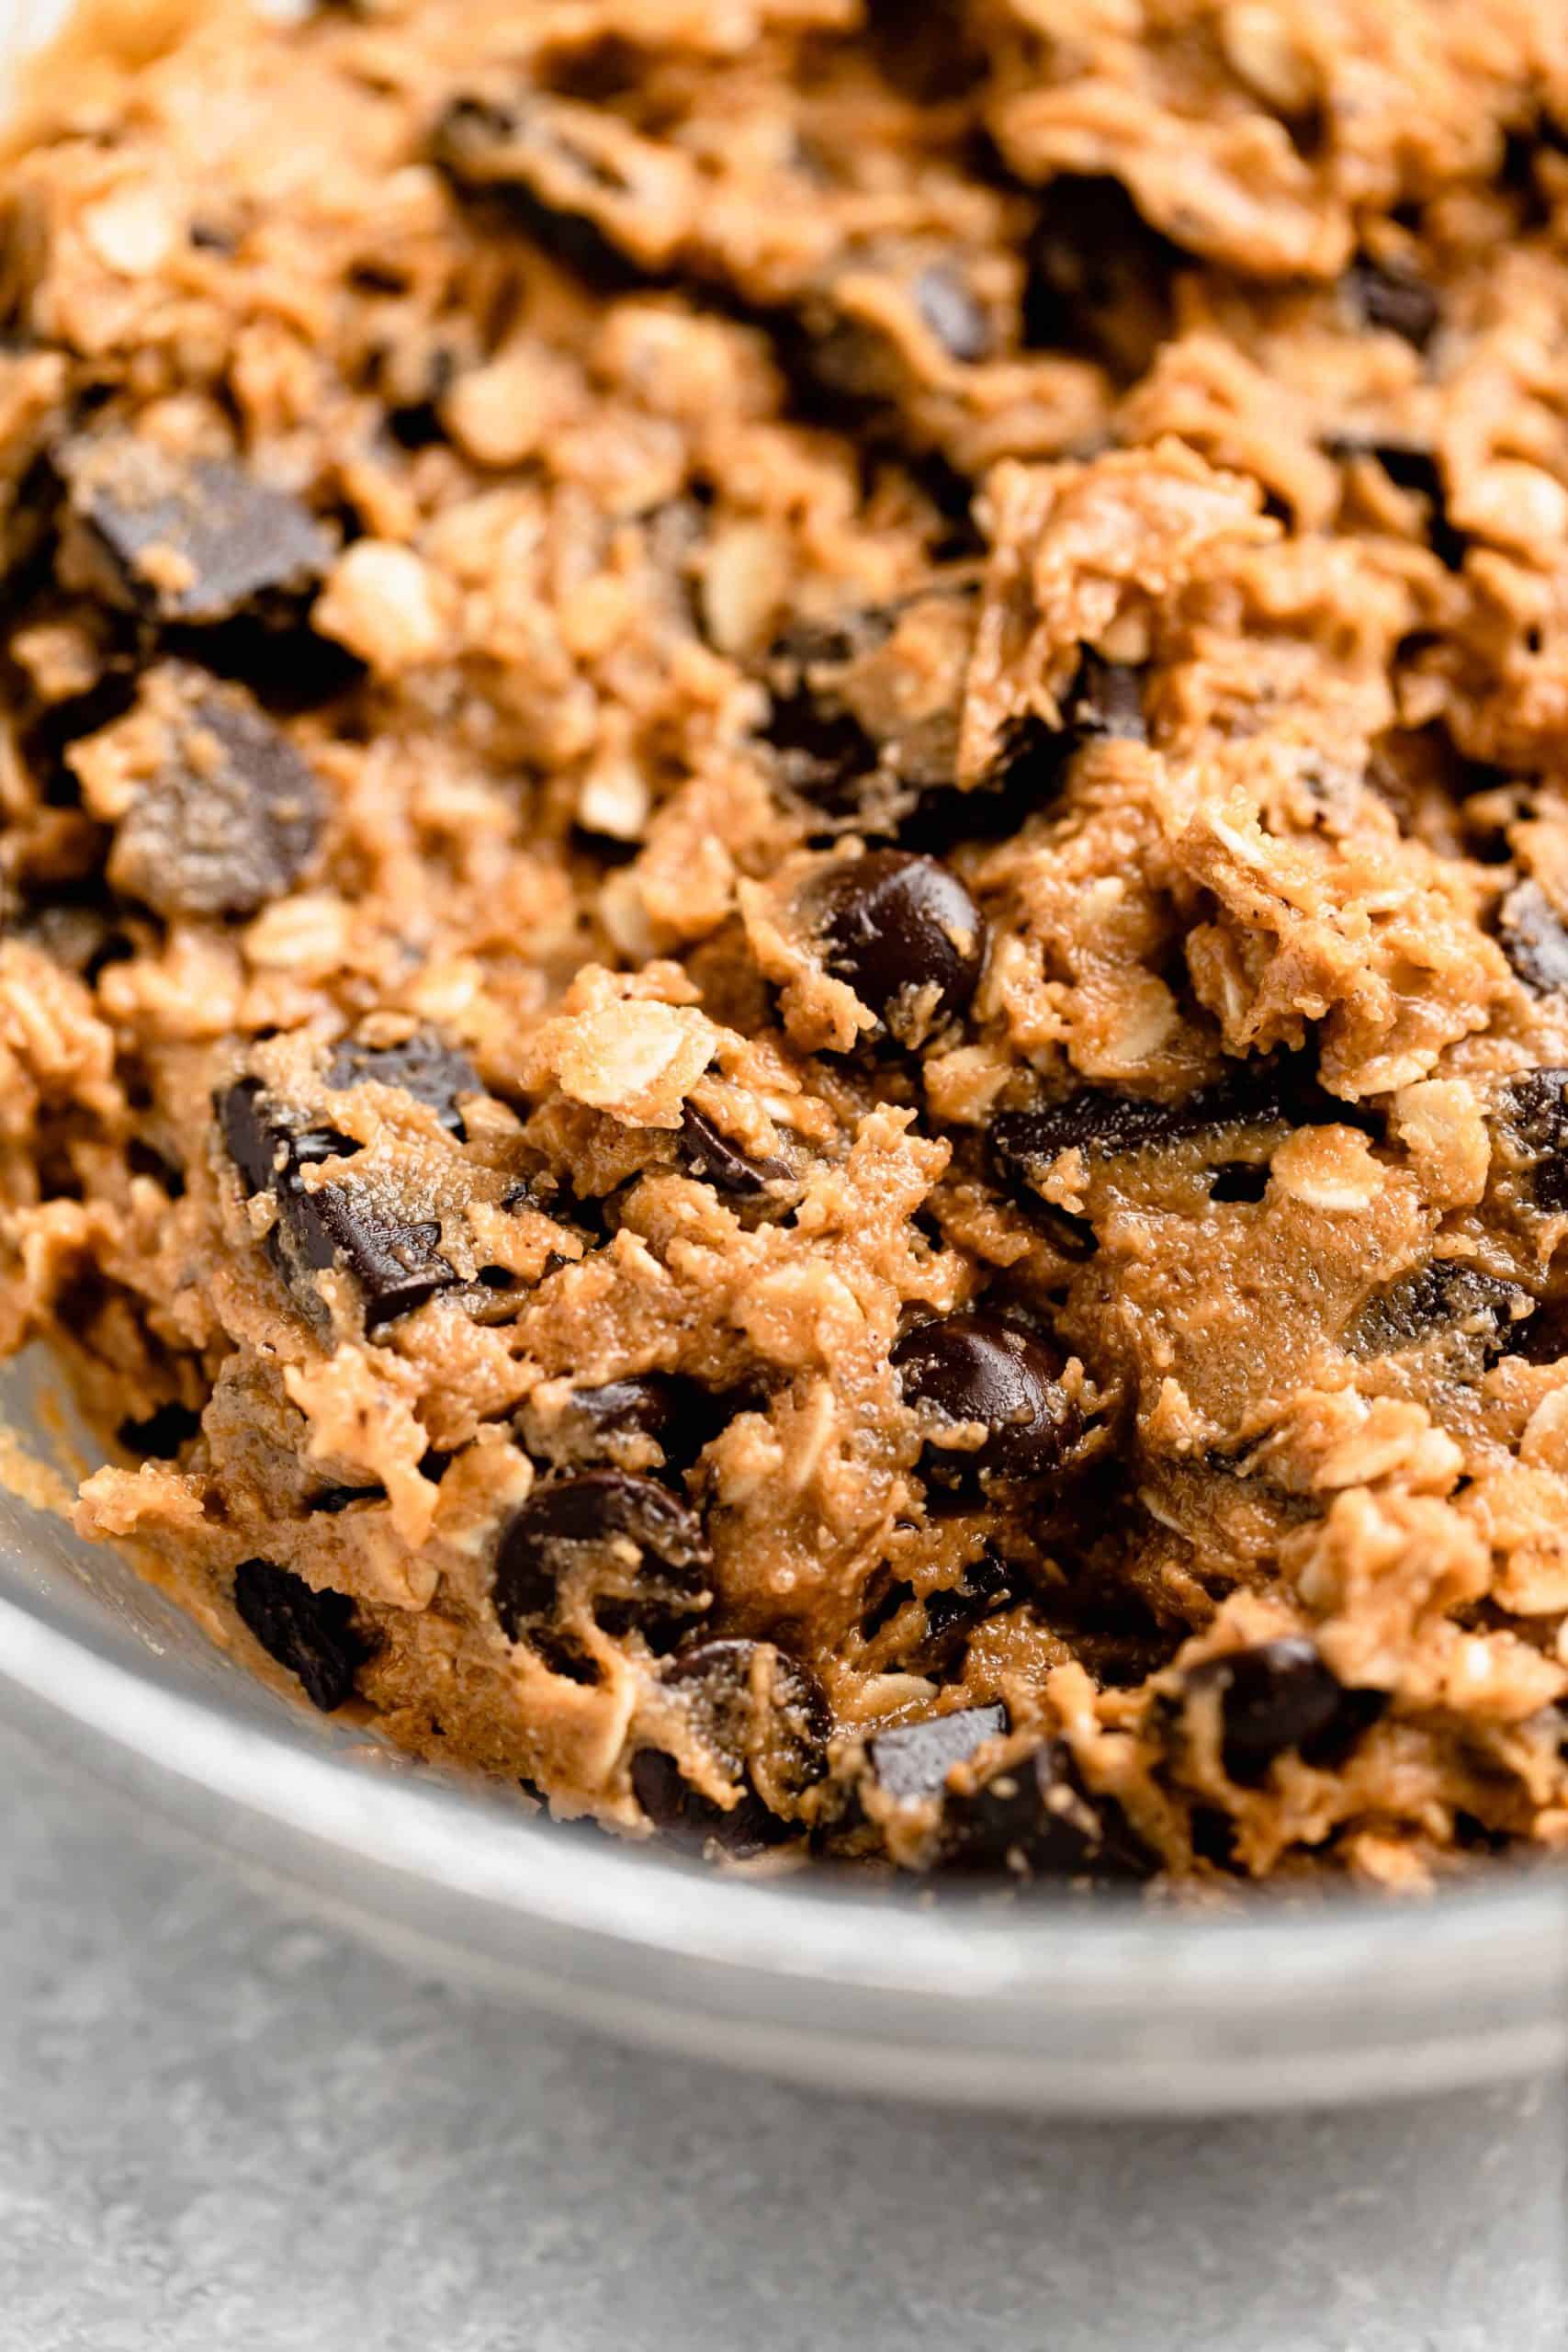 Peanut Butter Oatmeal Chocolate Chip Cookie dough in a bowl